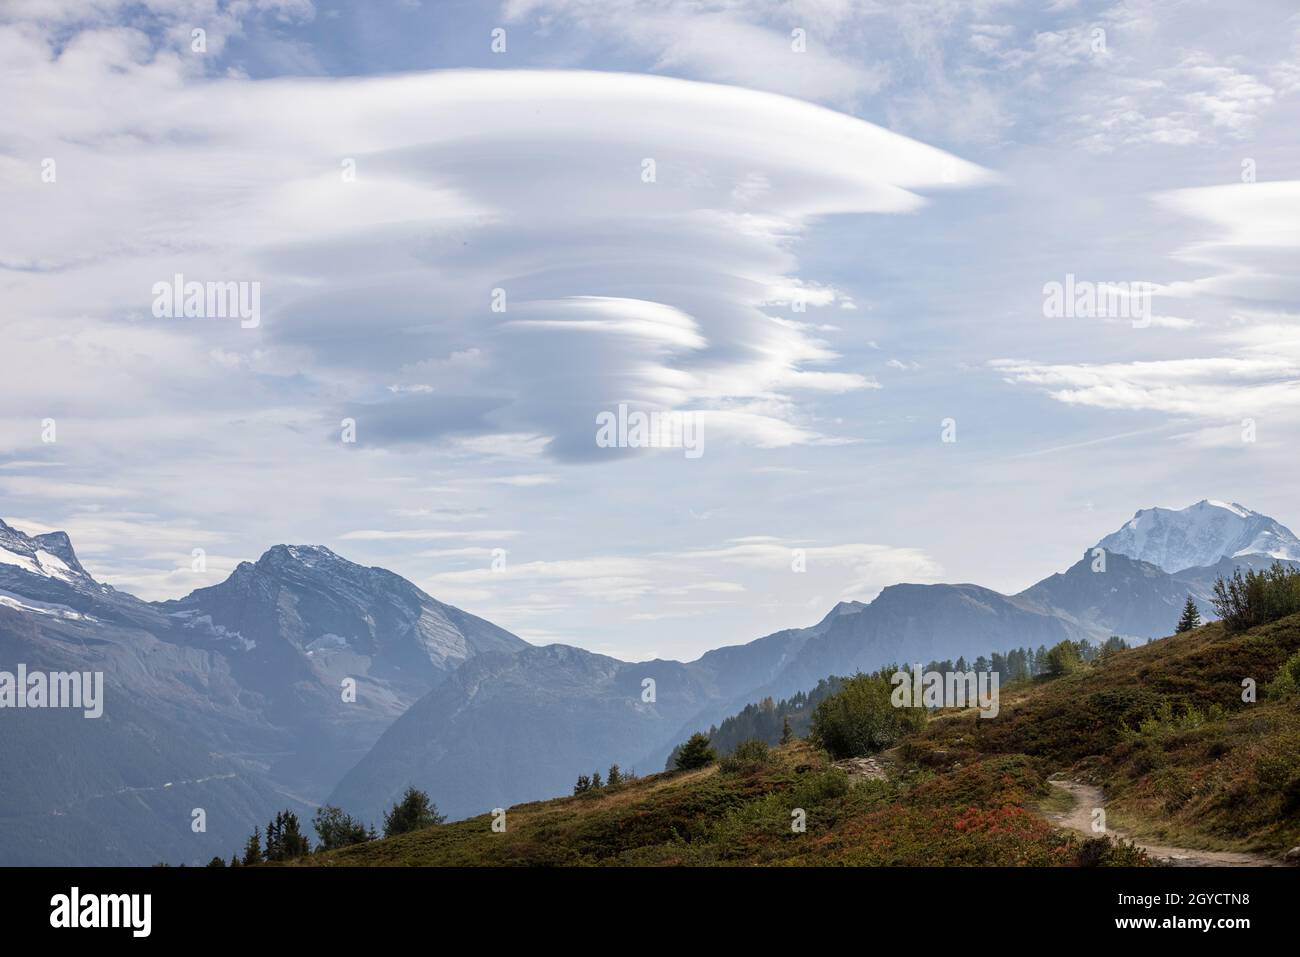 Lenticular cloud formation in a beautiful mountain landcape Stock Photo